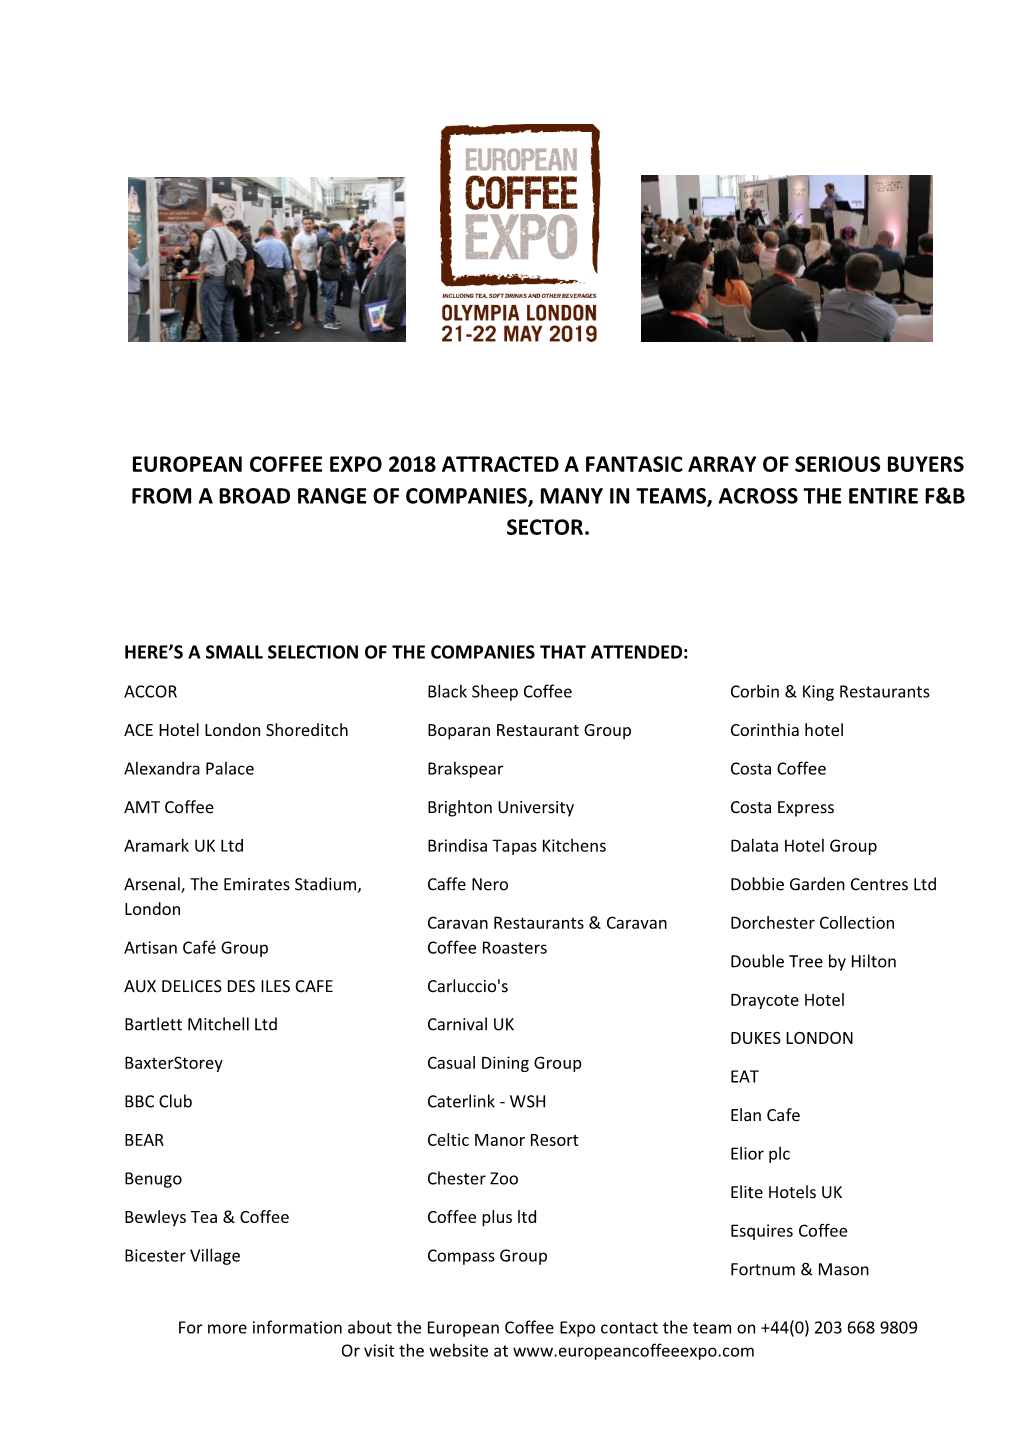 European Coffee Expo 2018 Attracted a Fantasic Array of Serious Buyers from a Broad Range of Companies, Many in Teams, Across the Entire F&B Sector